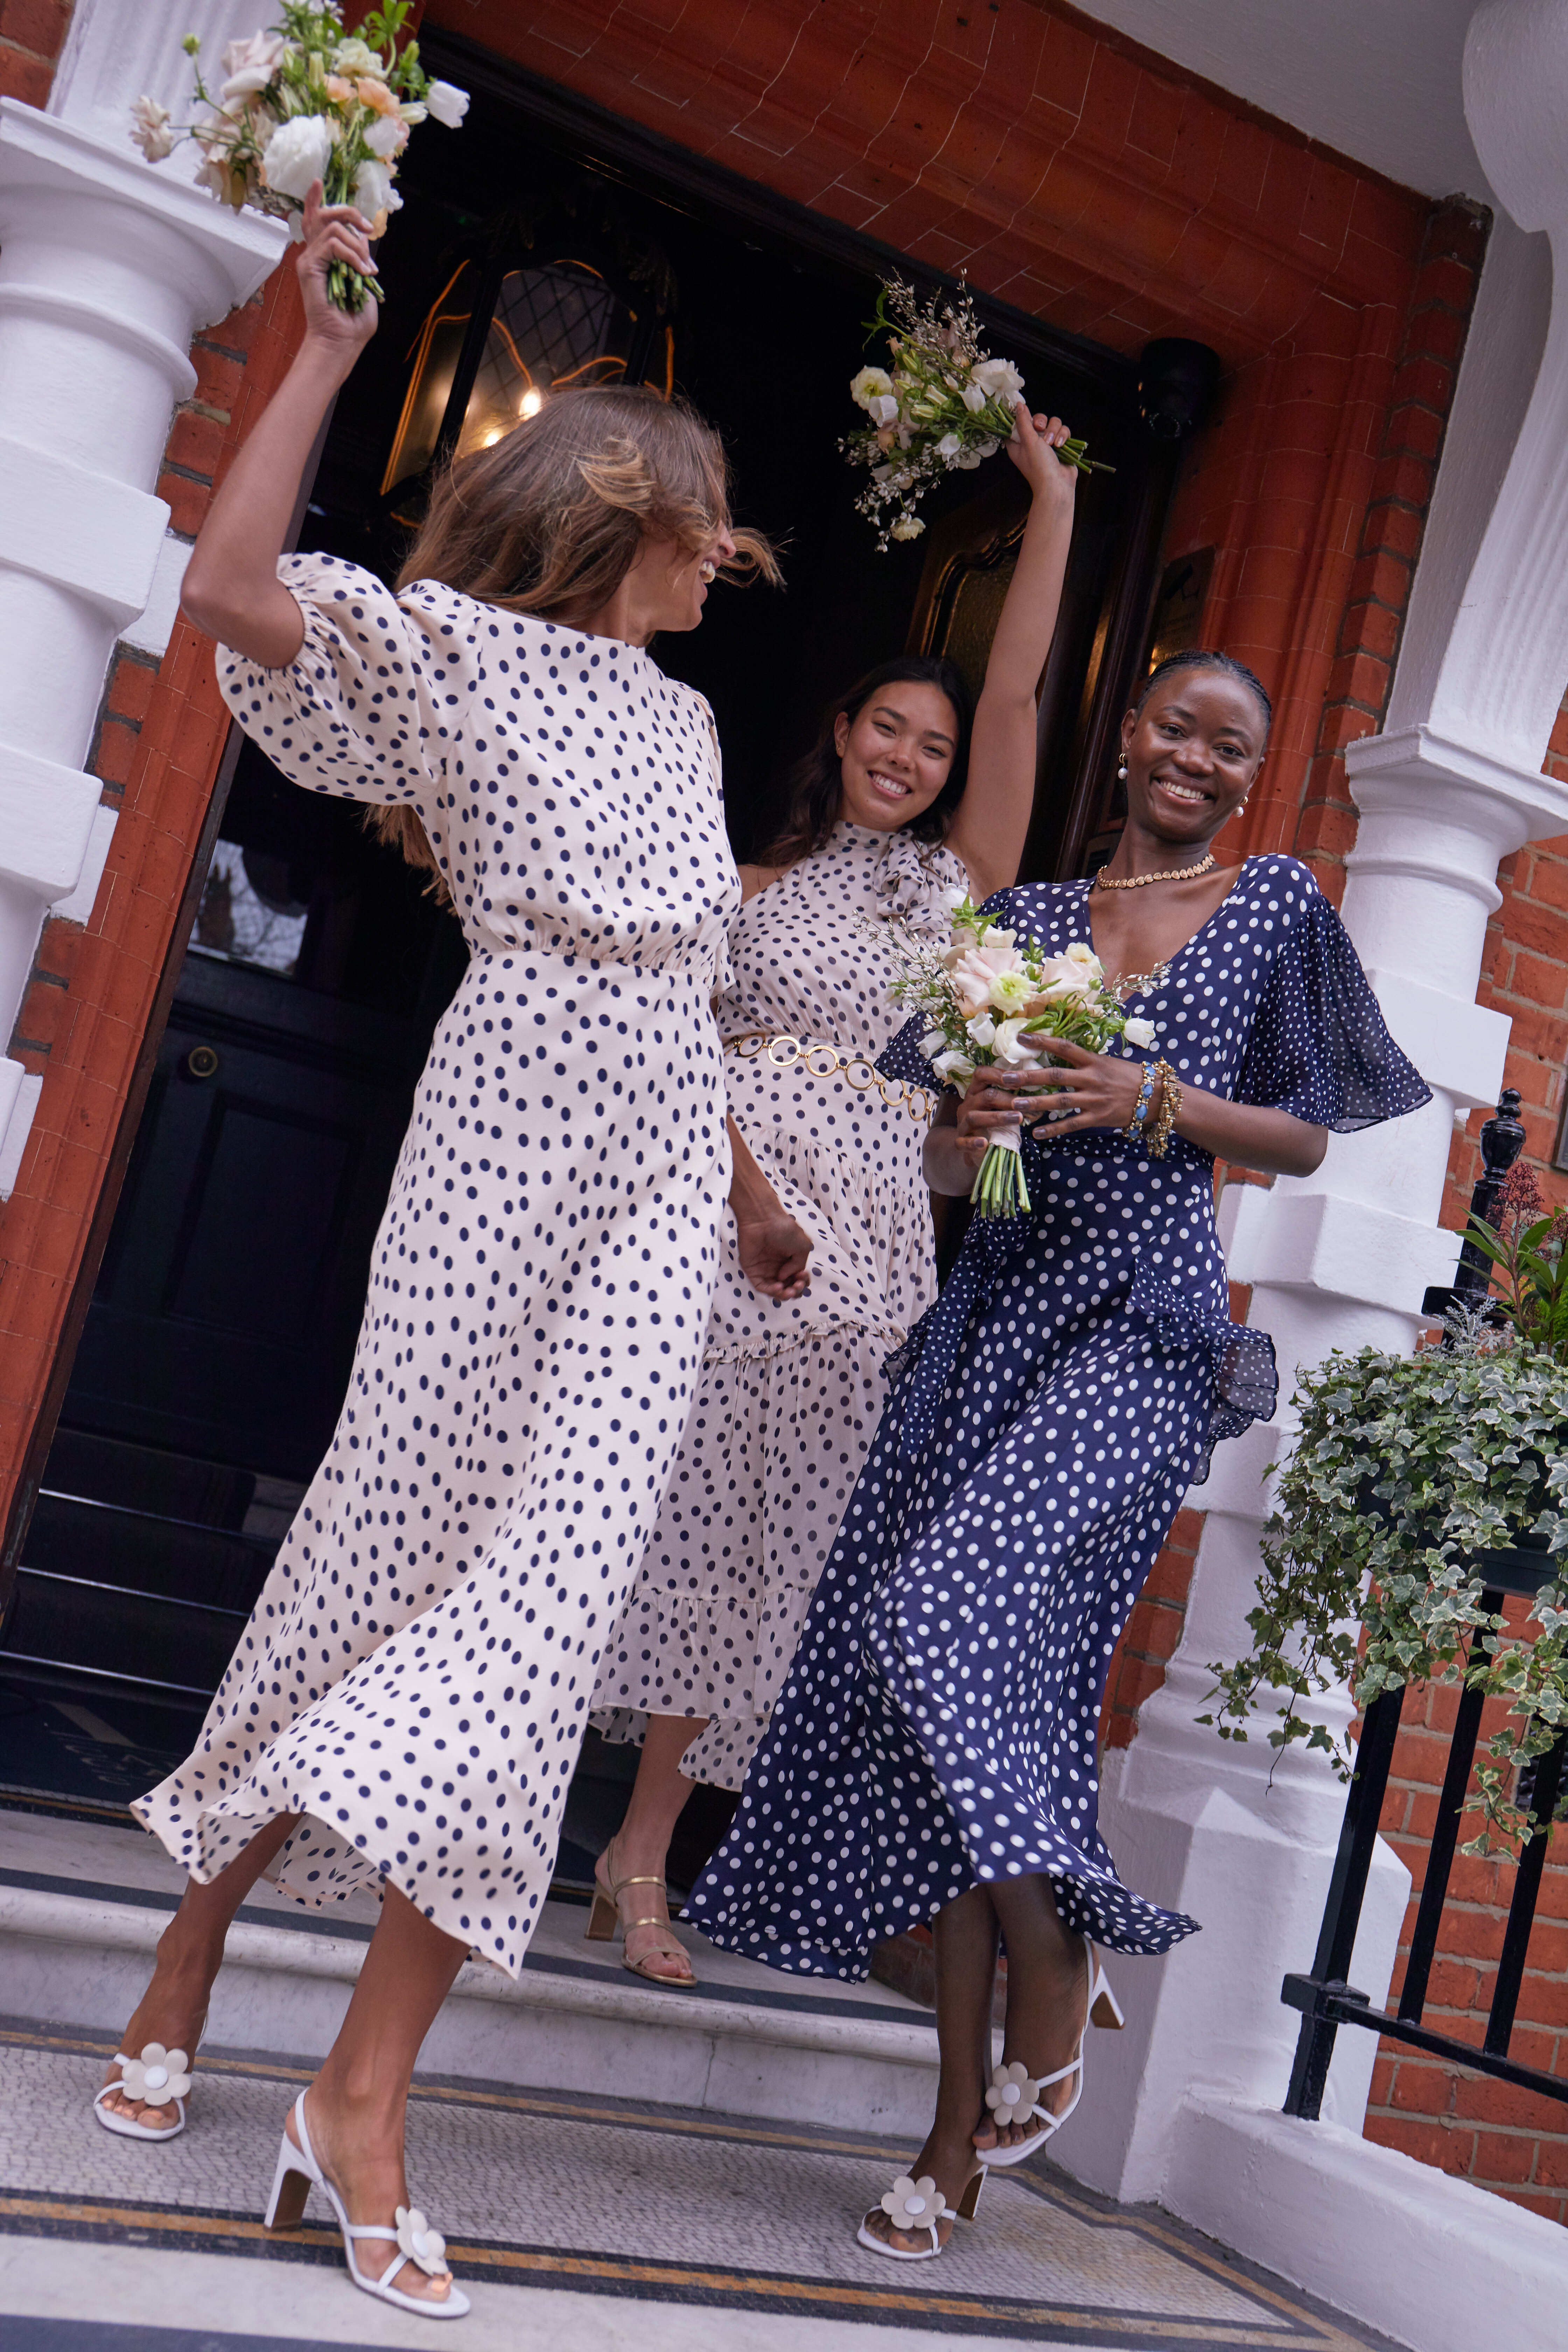 High Street Bridesmaid Dresses: Give your best girls a dress they’ll love